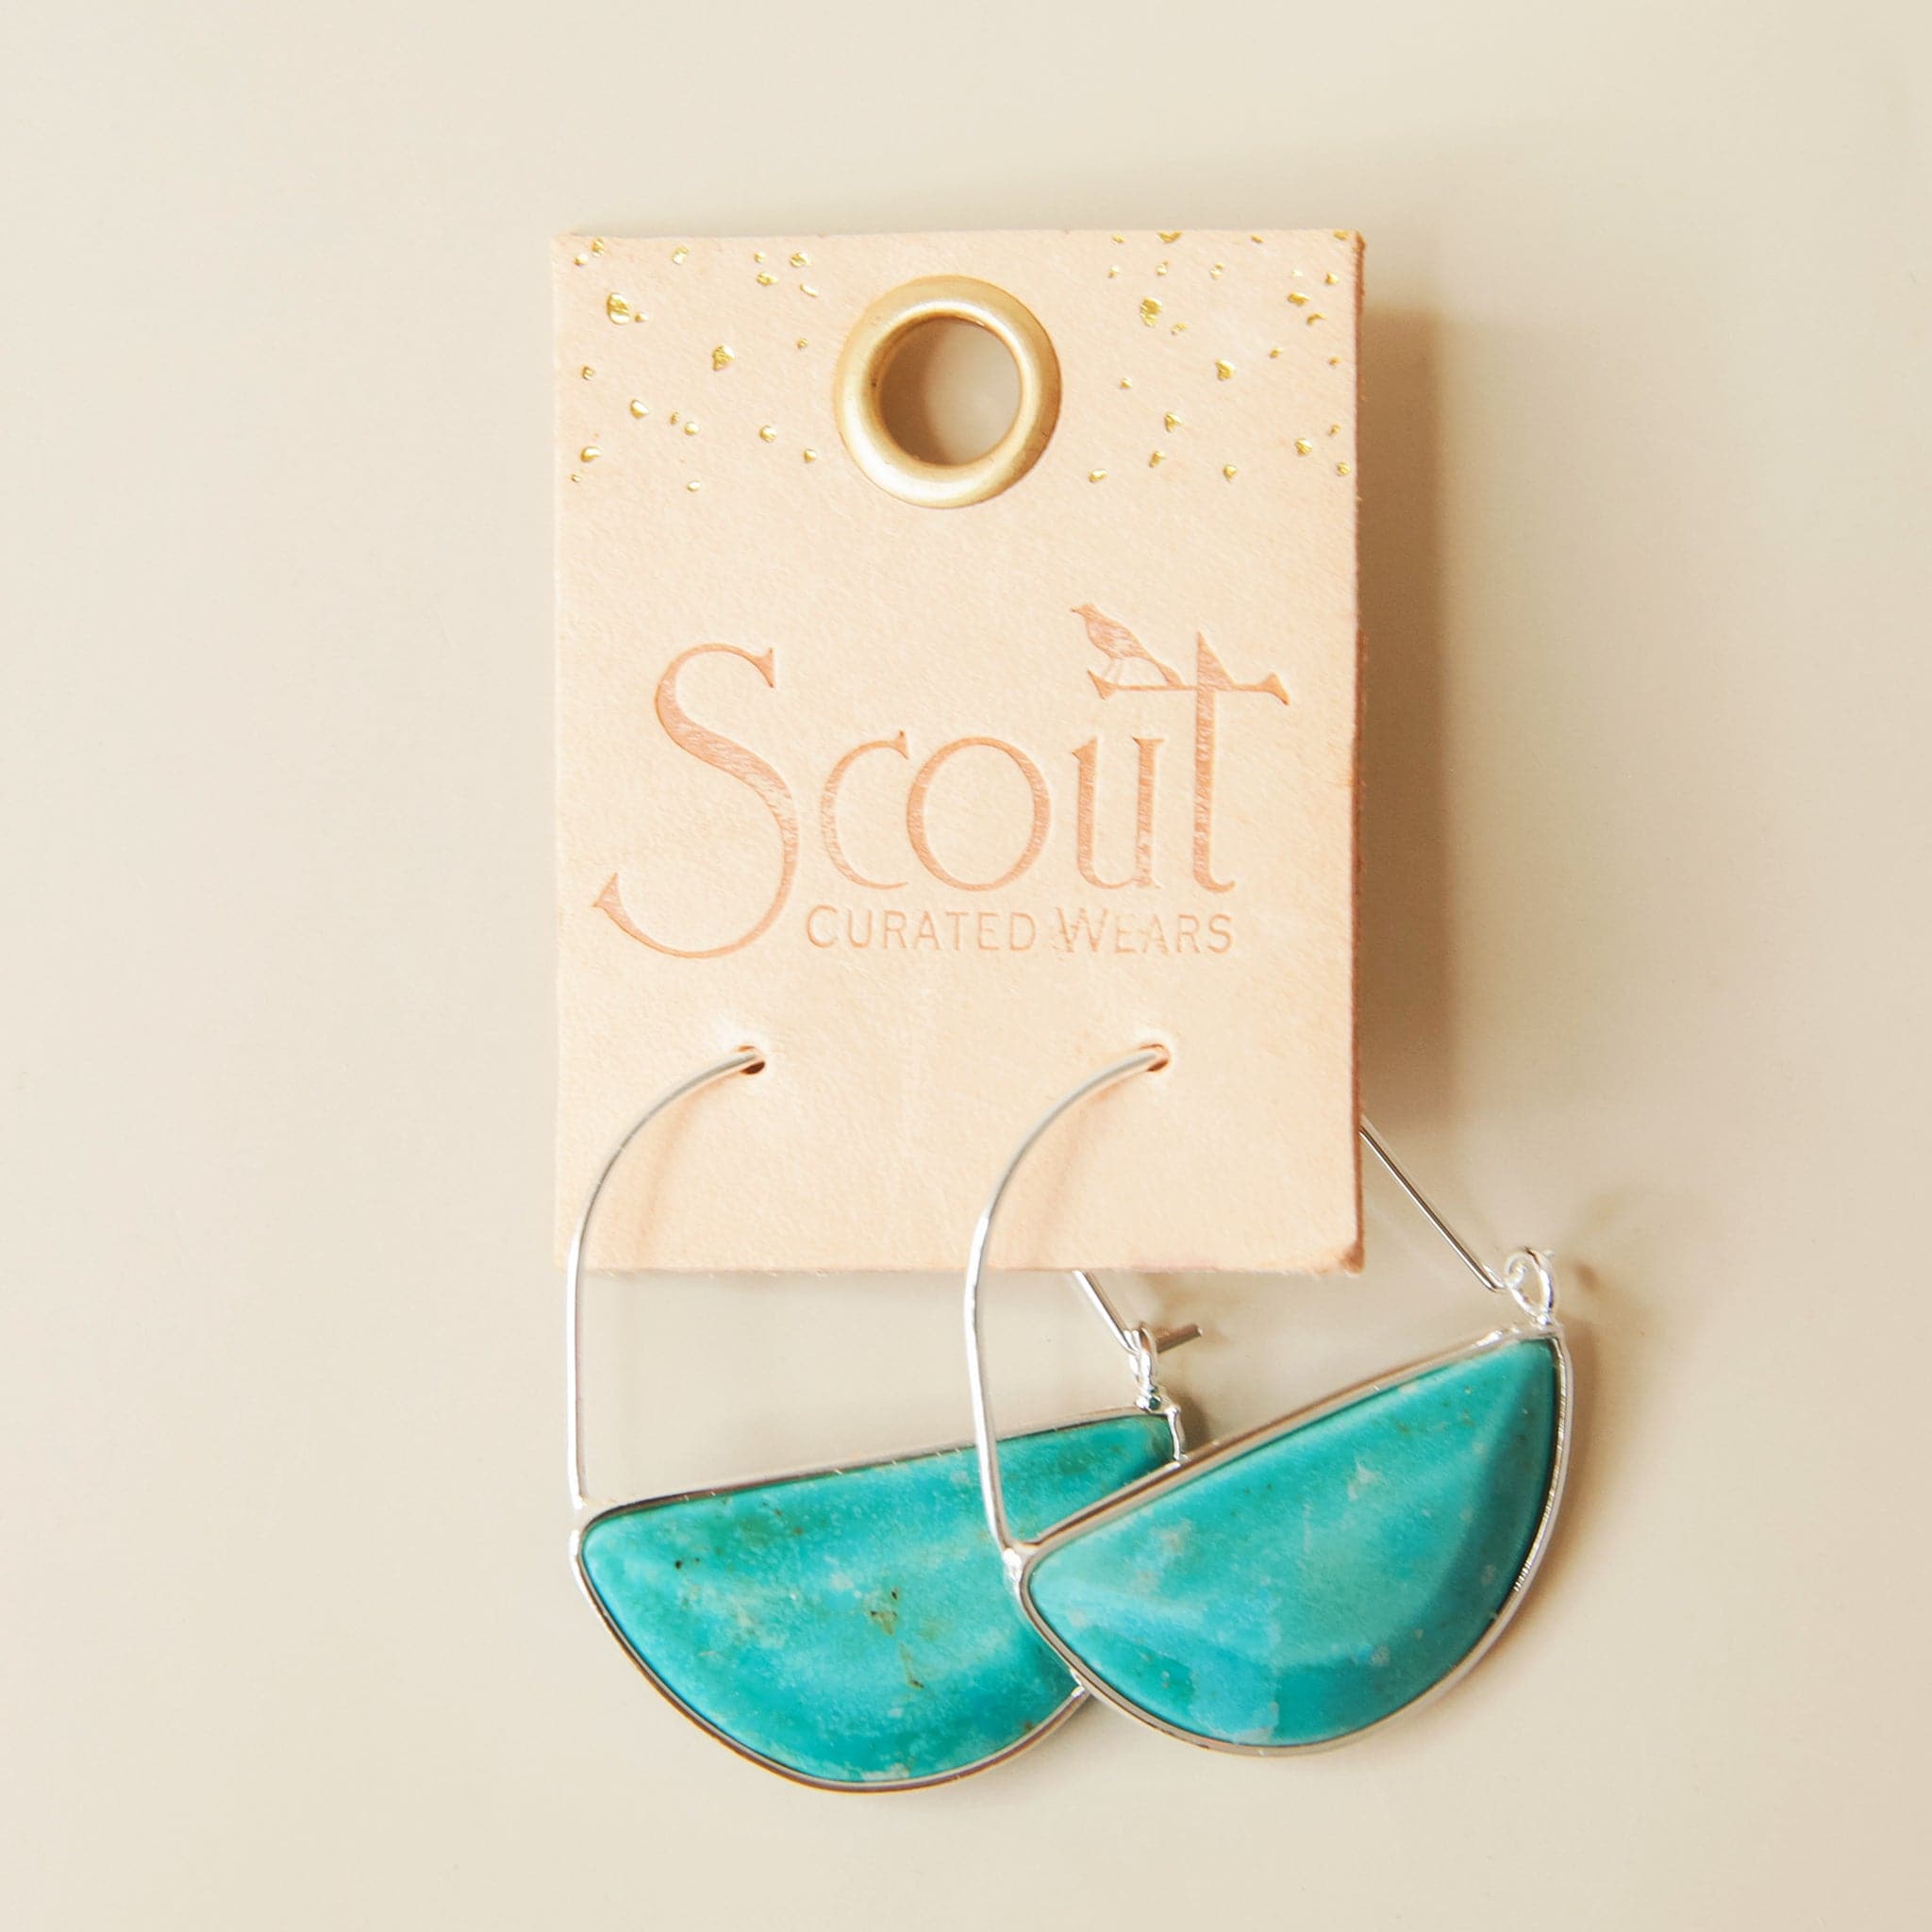 In front of a cream background is a pair of silver hoops. The bottom half of the hoop is a turquoise stone. The hoops are on a peach leather tag. Etched into the tag is text that reads ‘Scout curated wears.'